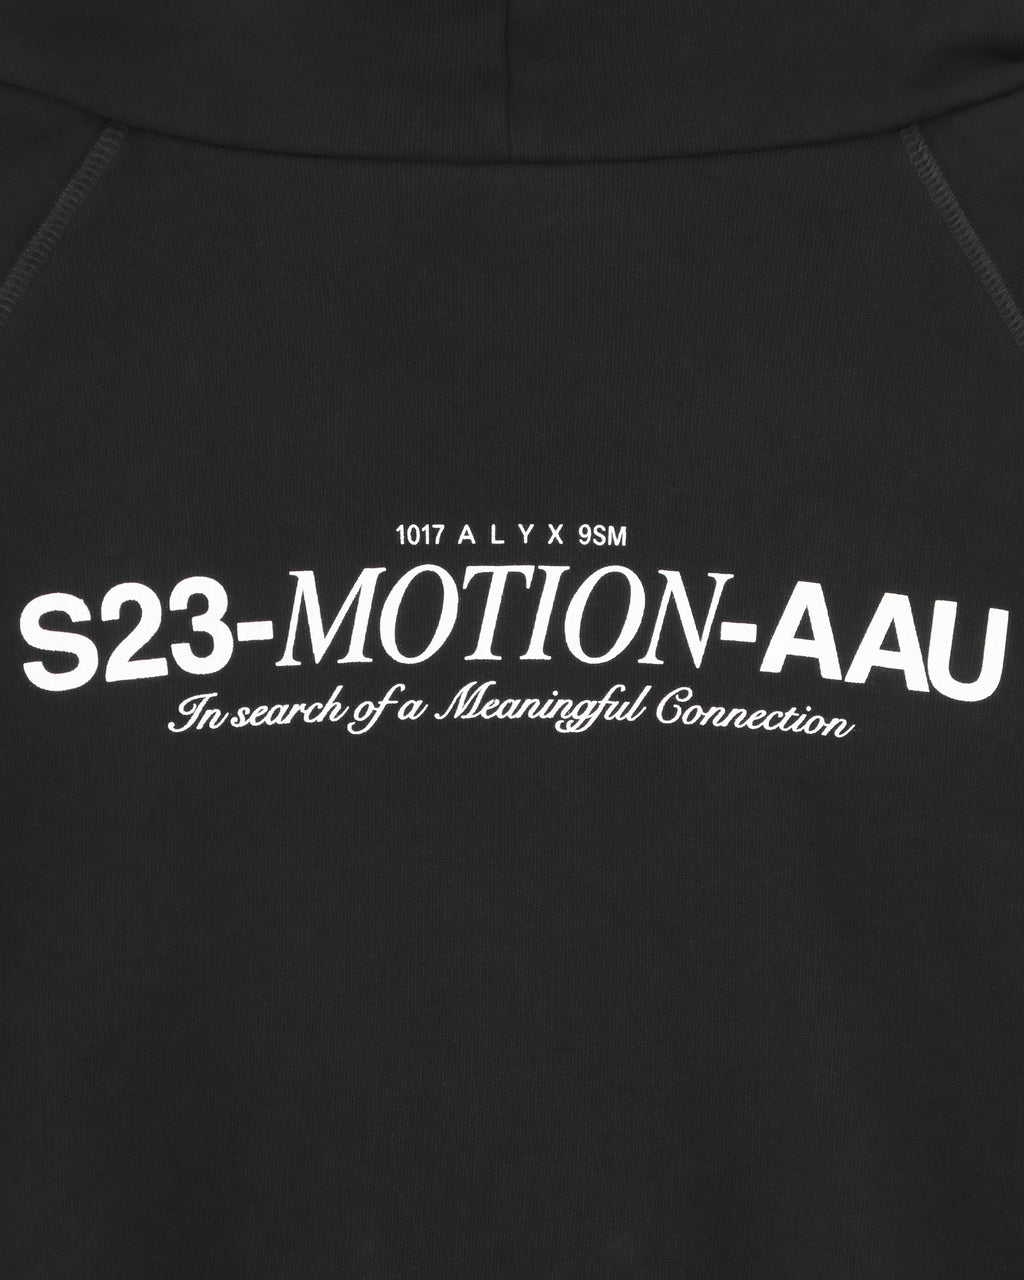 COLLECTION LOGO CROPPED HOODIE